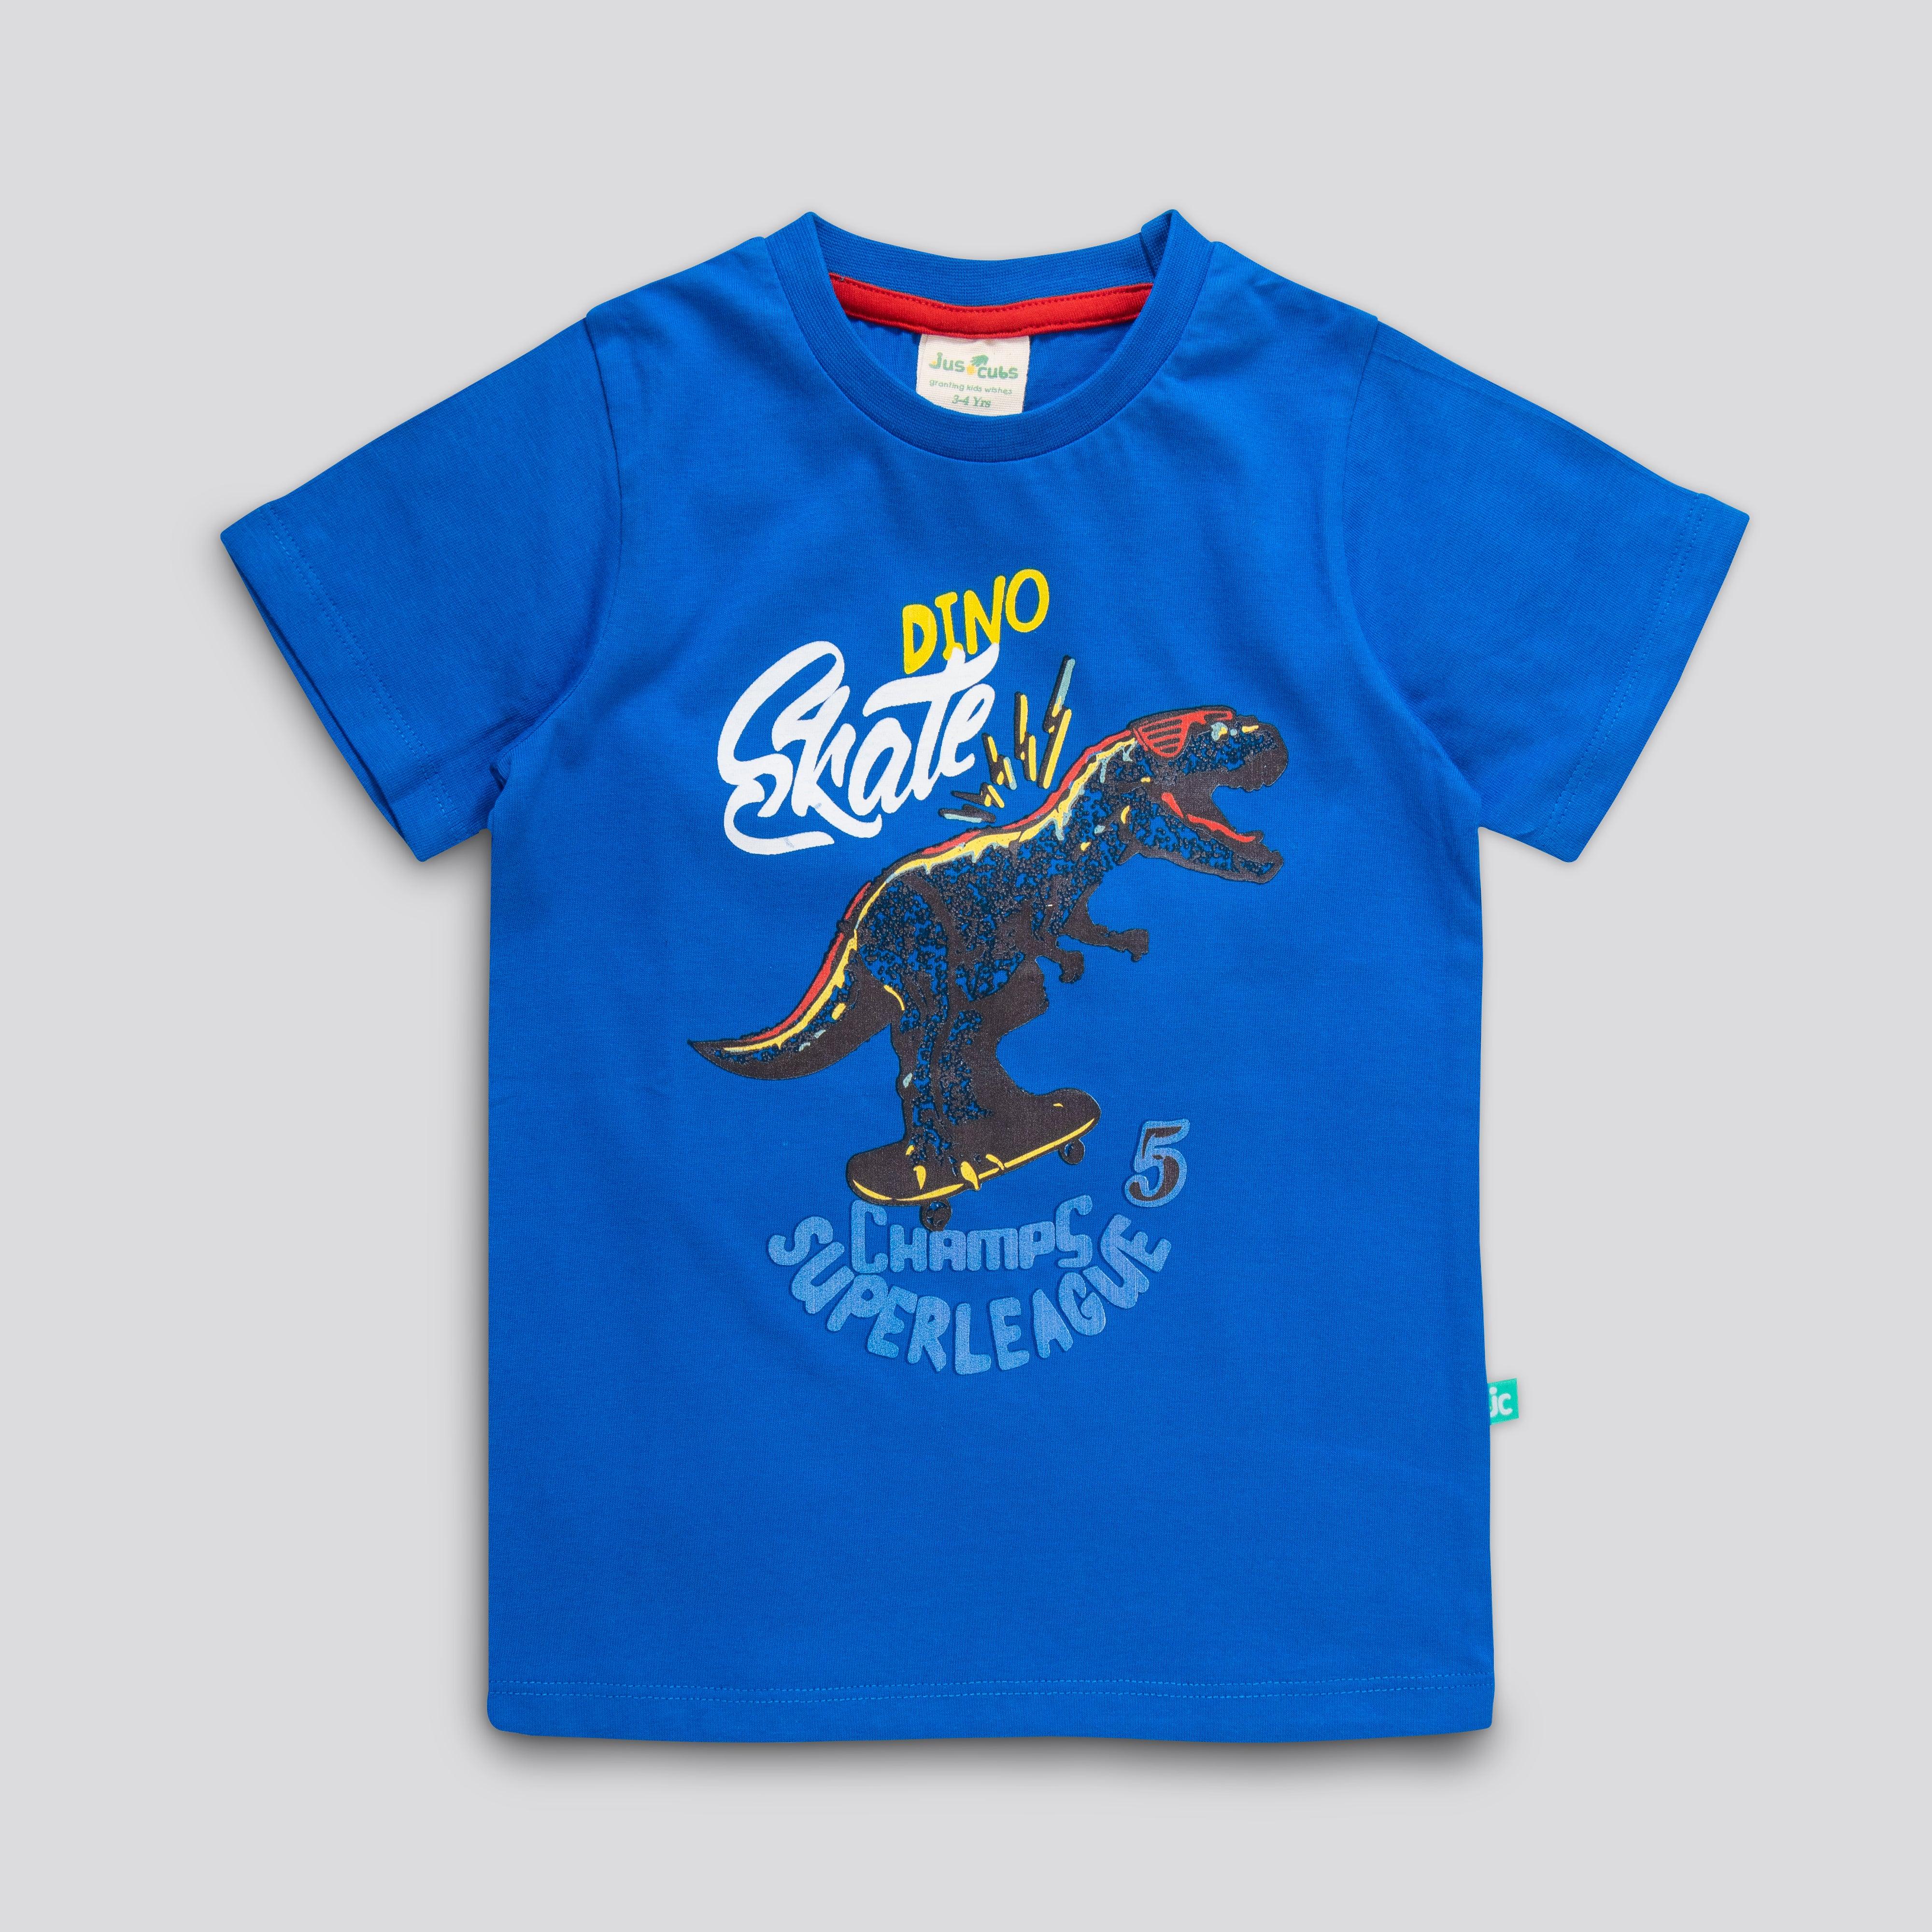 YOUNG BOYS DINO GRAPHIC PRINTED T SHIRT - Juscubs